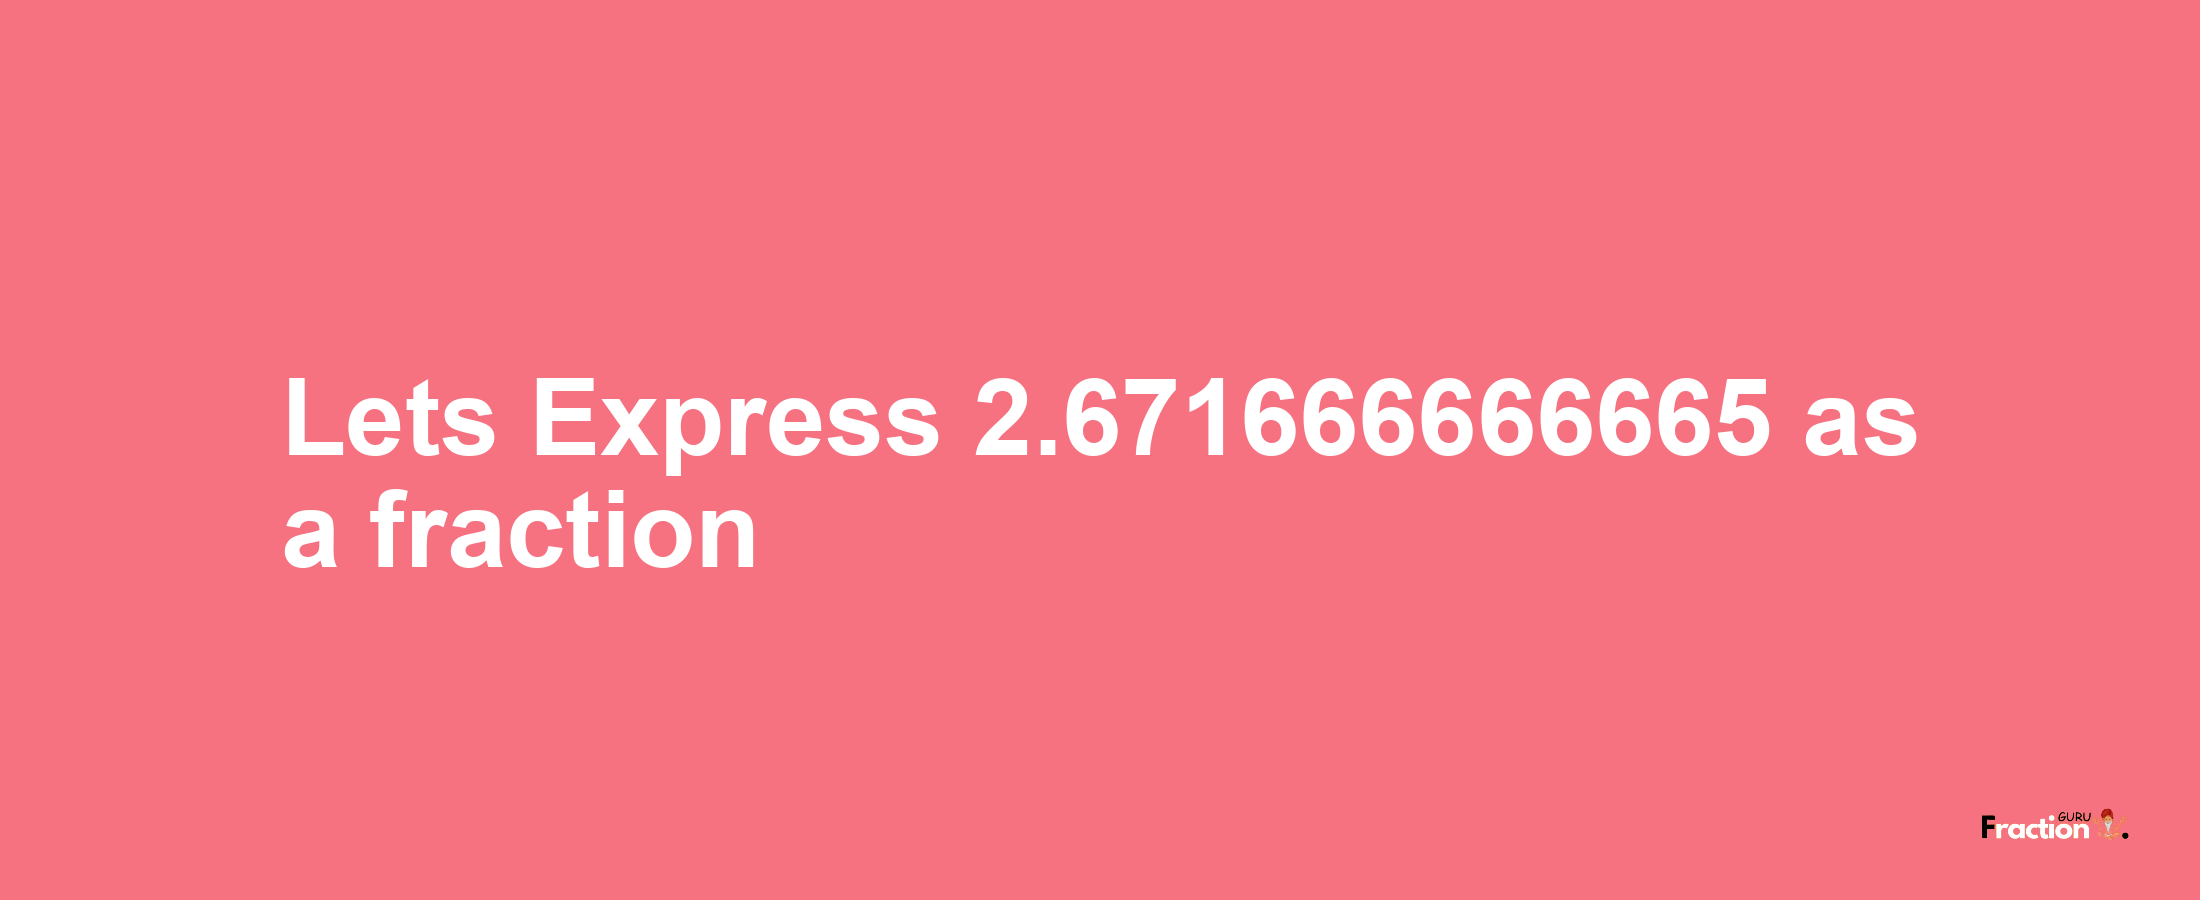 Lets Express 2.671666666665 as afraction